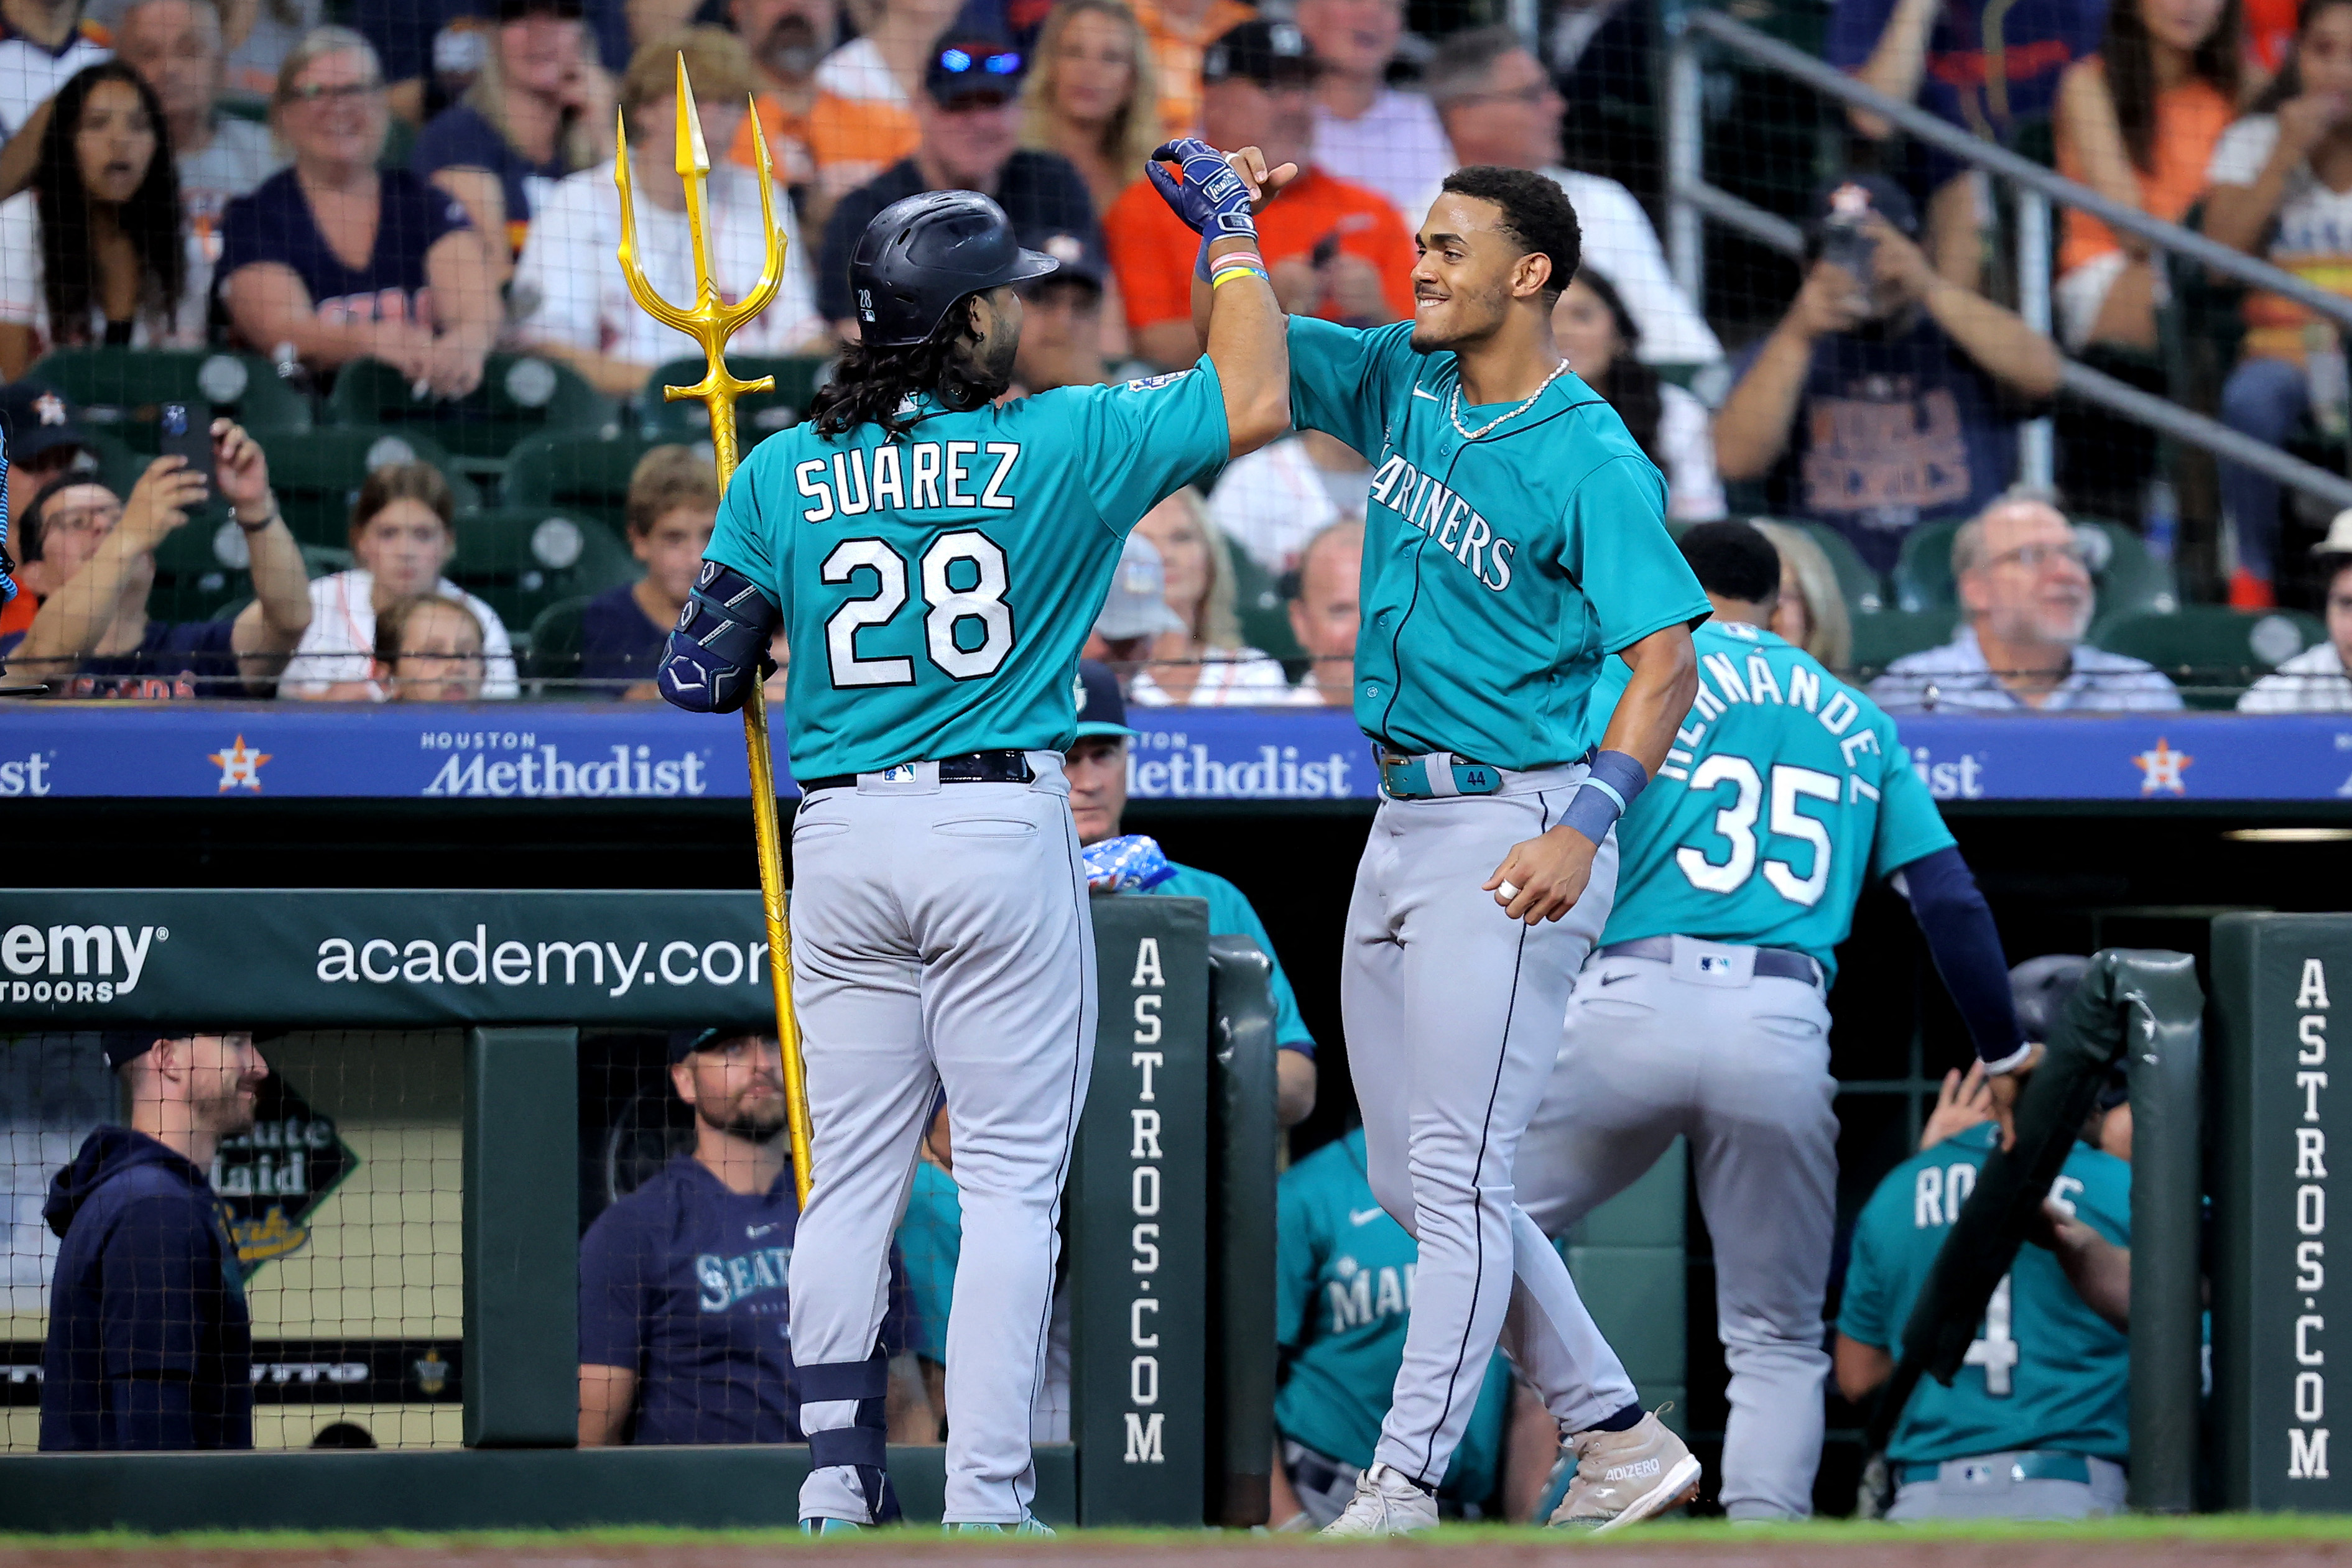 Houston Astros - Swept the Mariners - Big. Turn back the clock day - Fun.  Princess day - Adorable. Series photo blog is up featuring these 🔥  throwbacks